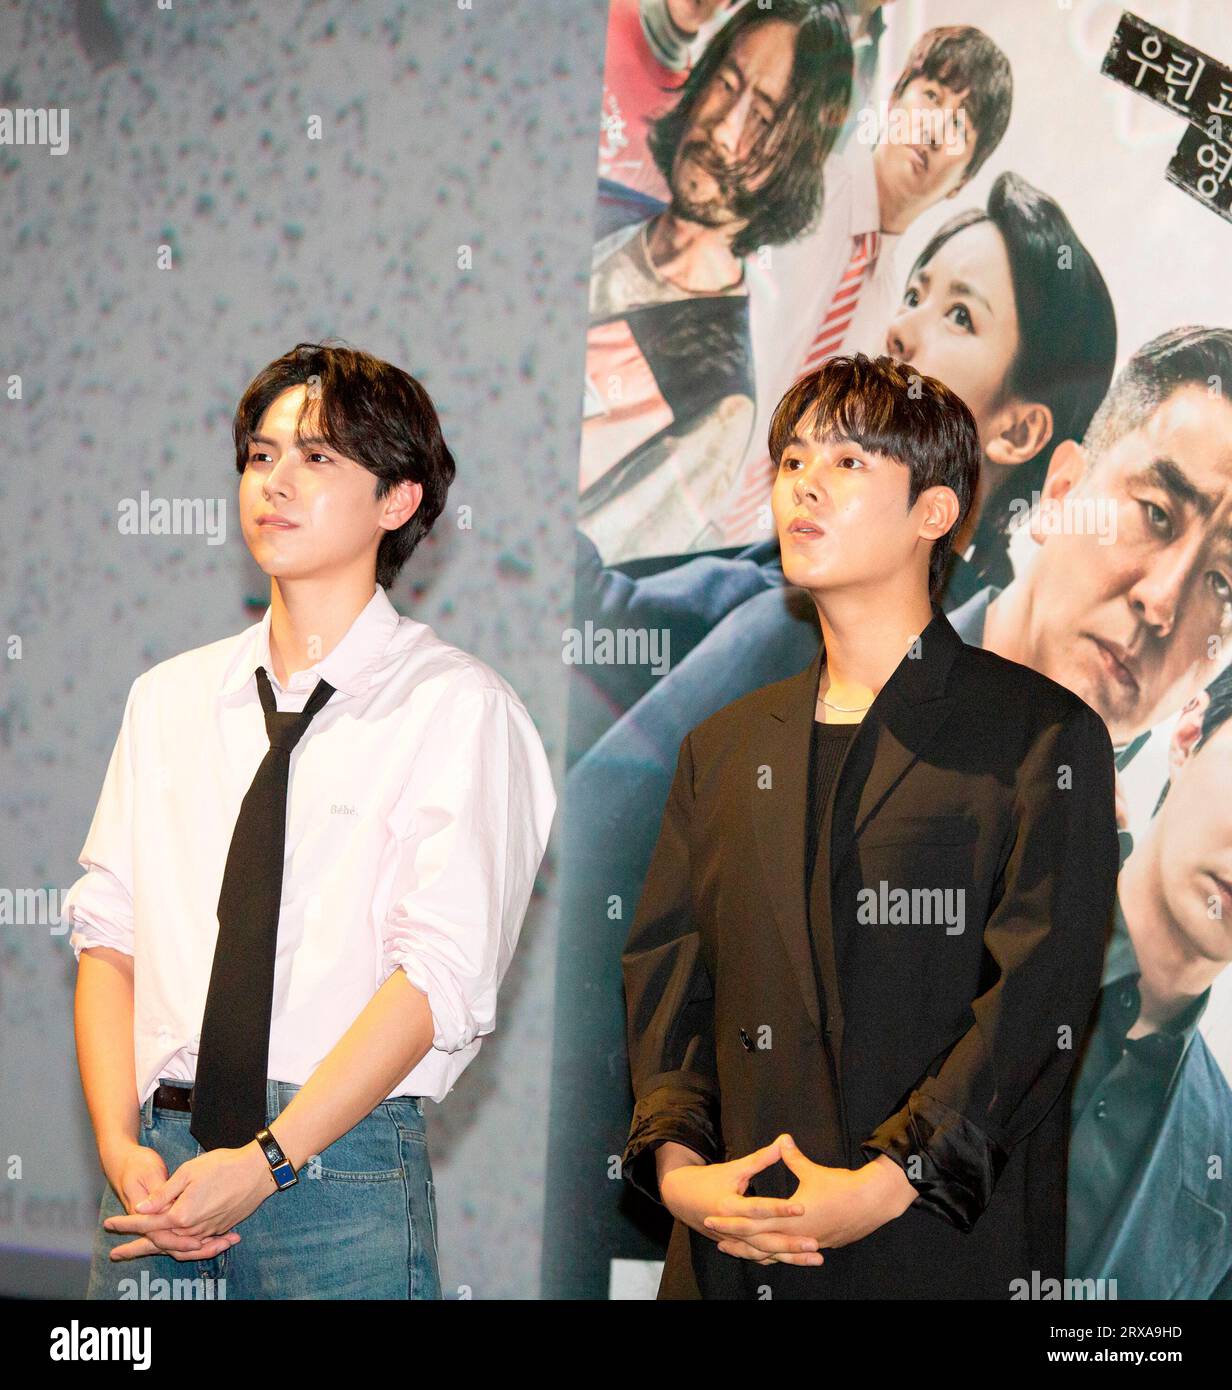 Kim Do-Hoon (L) and Lee Jung-Ha, September 20, 2023 : Cast members of the Disney  original drama series 'Moving', Kim Do-Hoon and Lee Jung-Ha attend a stage greeting before the last three episodes of the drama are screened for fans at a cinema in Seoul, South Korea. The sci-fi action series 'Moving' features a group of superpowered individuals who hide their true abilities from the world in order to protect their families from danger. The 20-episode series is based on a hit webtoon by Kang Full. Credit: Lee Jae-Won/AFLO/Alamy Live News Stock Photo